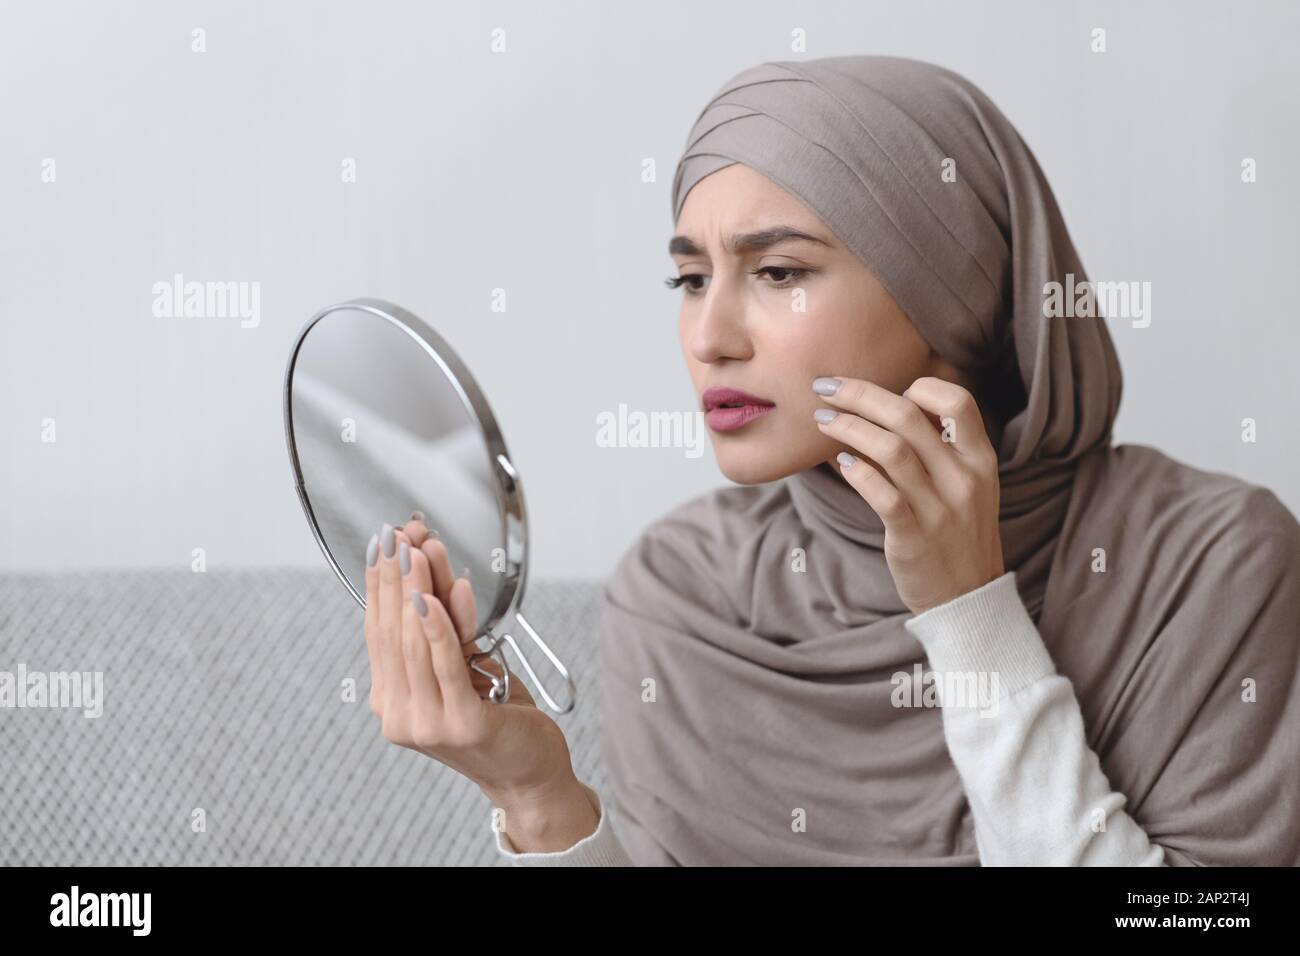 Muslim Girl In Hijab Looking In Round Mirror And Touching Skin Stock ...